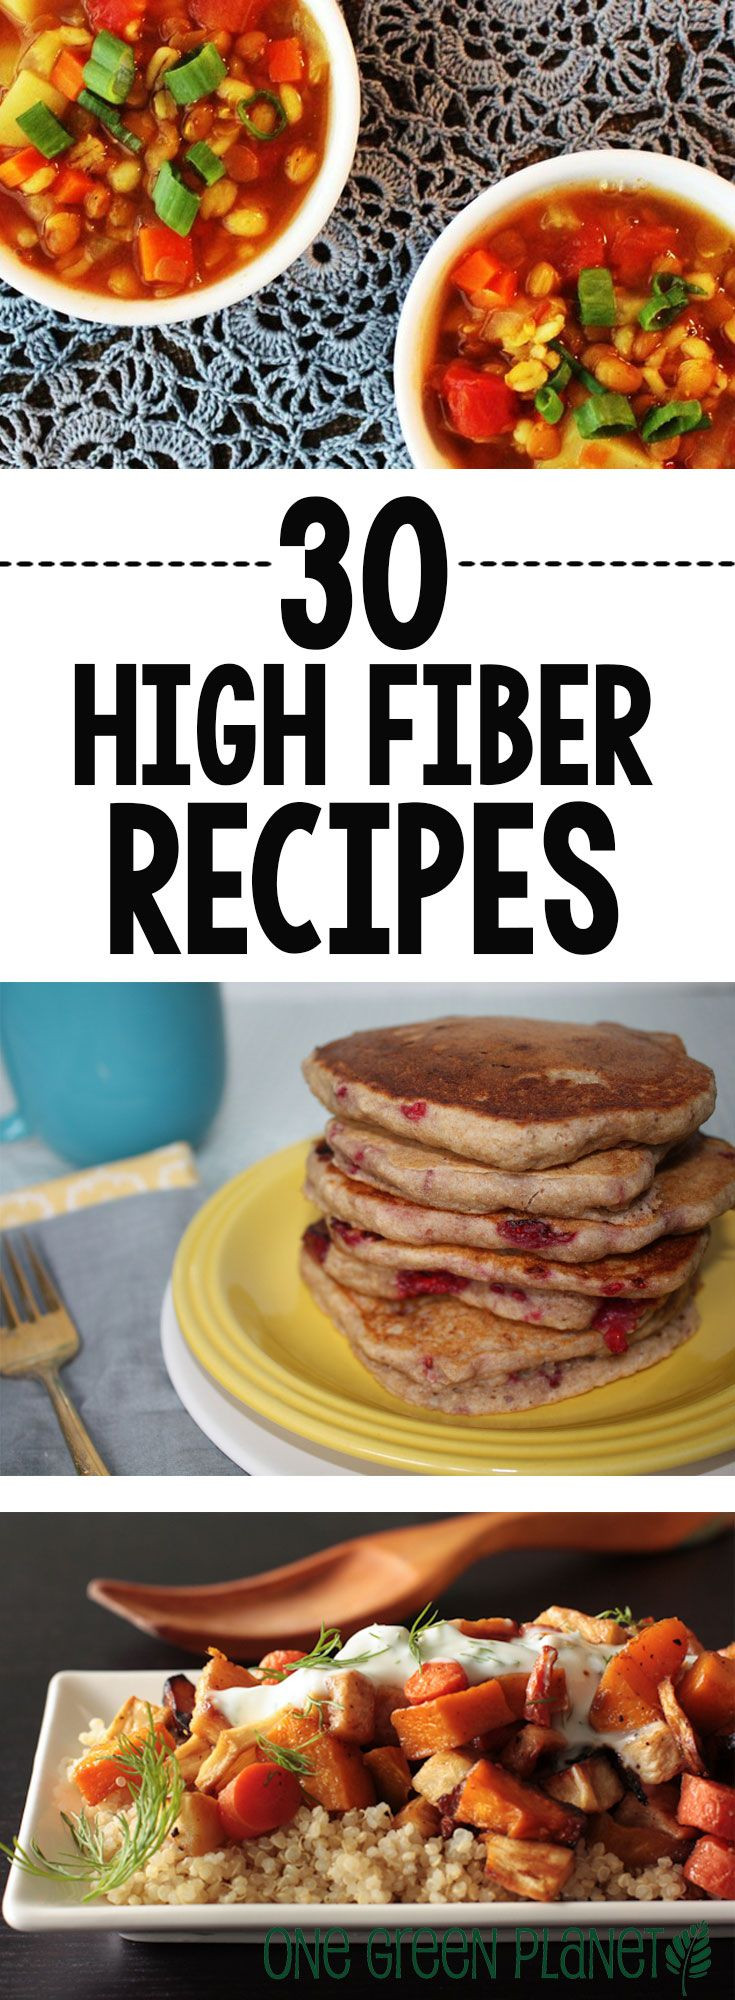 High Fiber Recipes For Weight Loss
 30 Vegan High Fiber Recipes to Keep Your System Moving